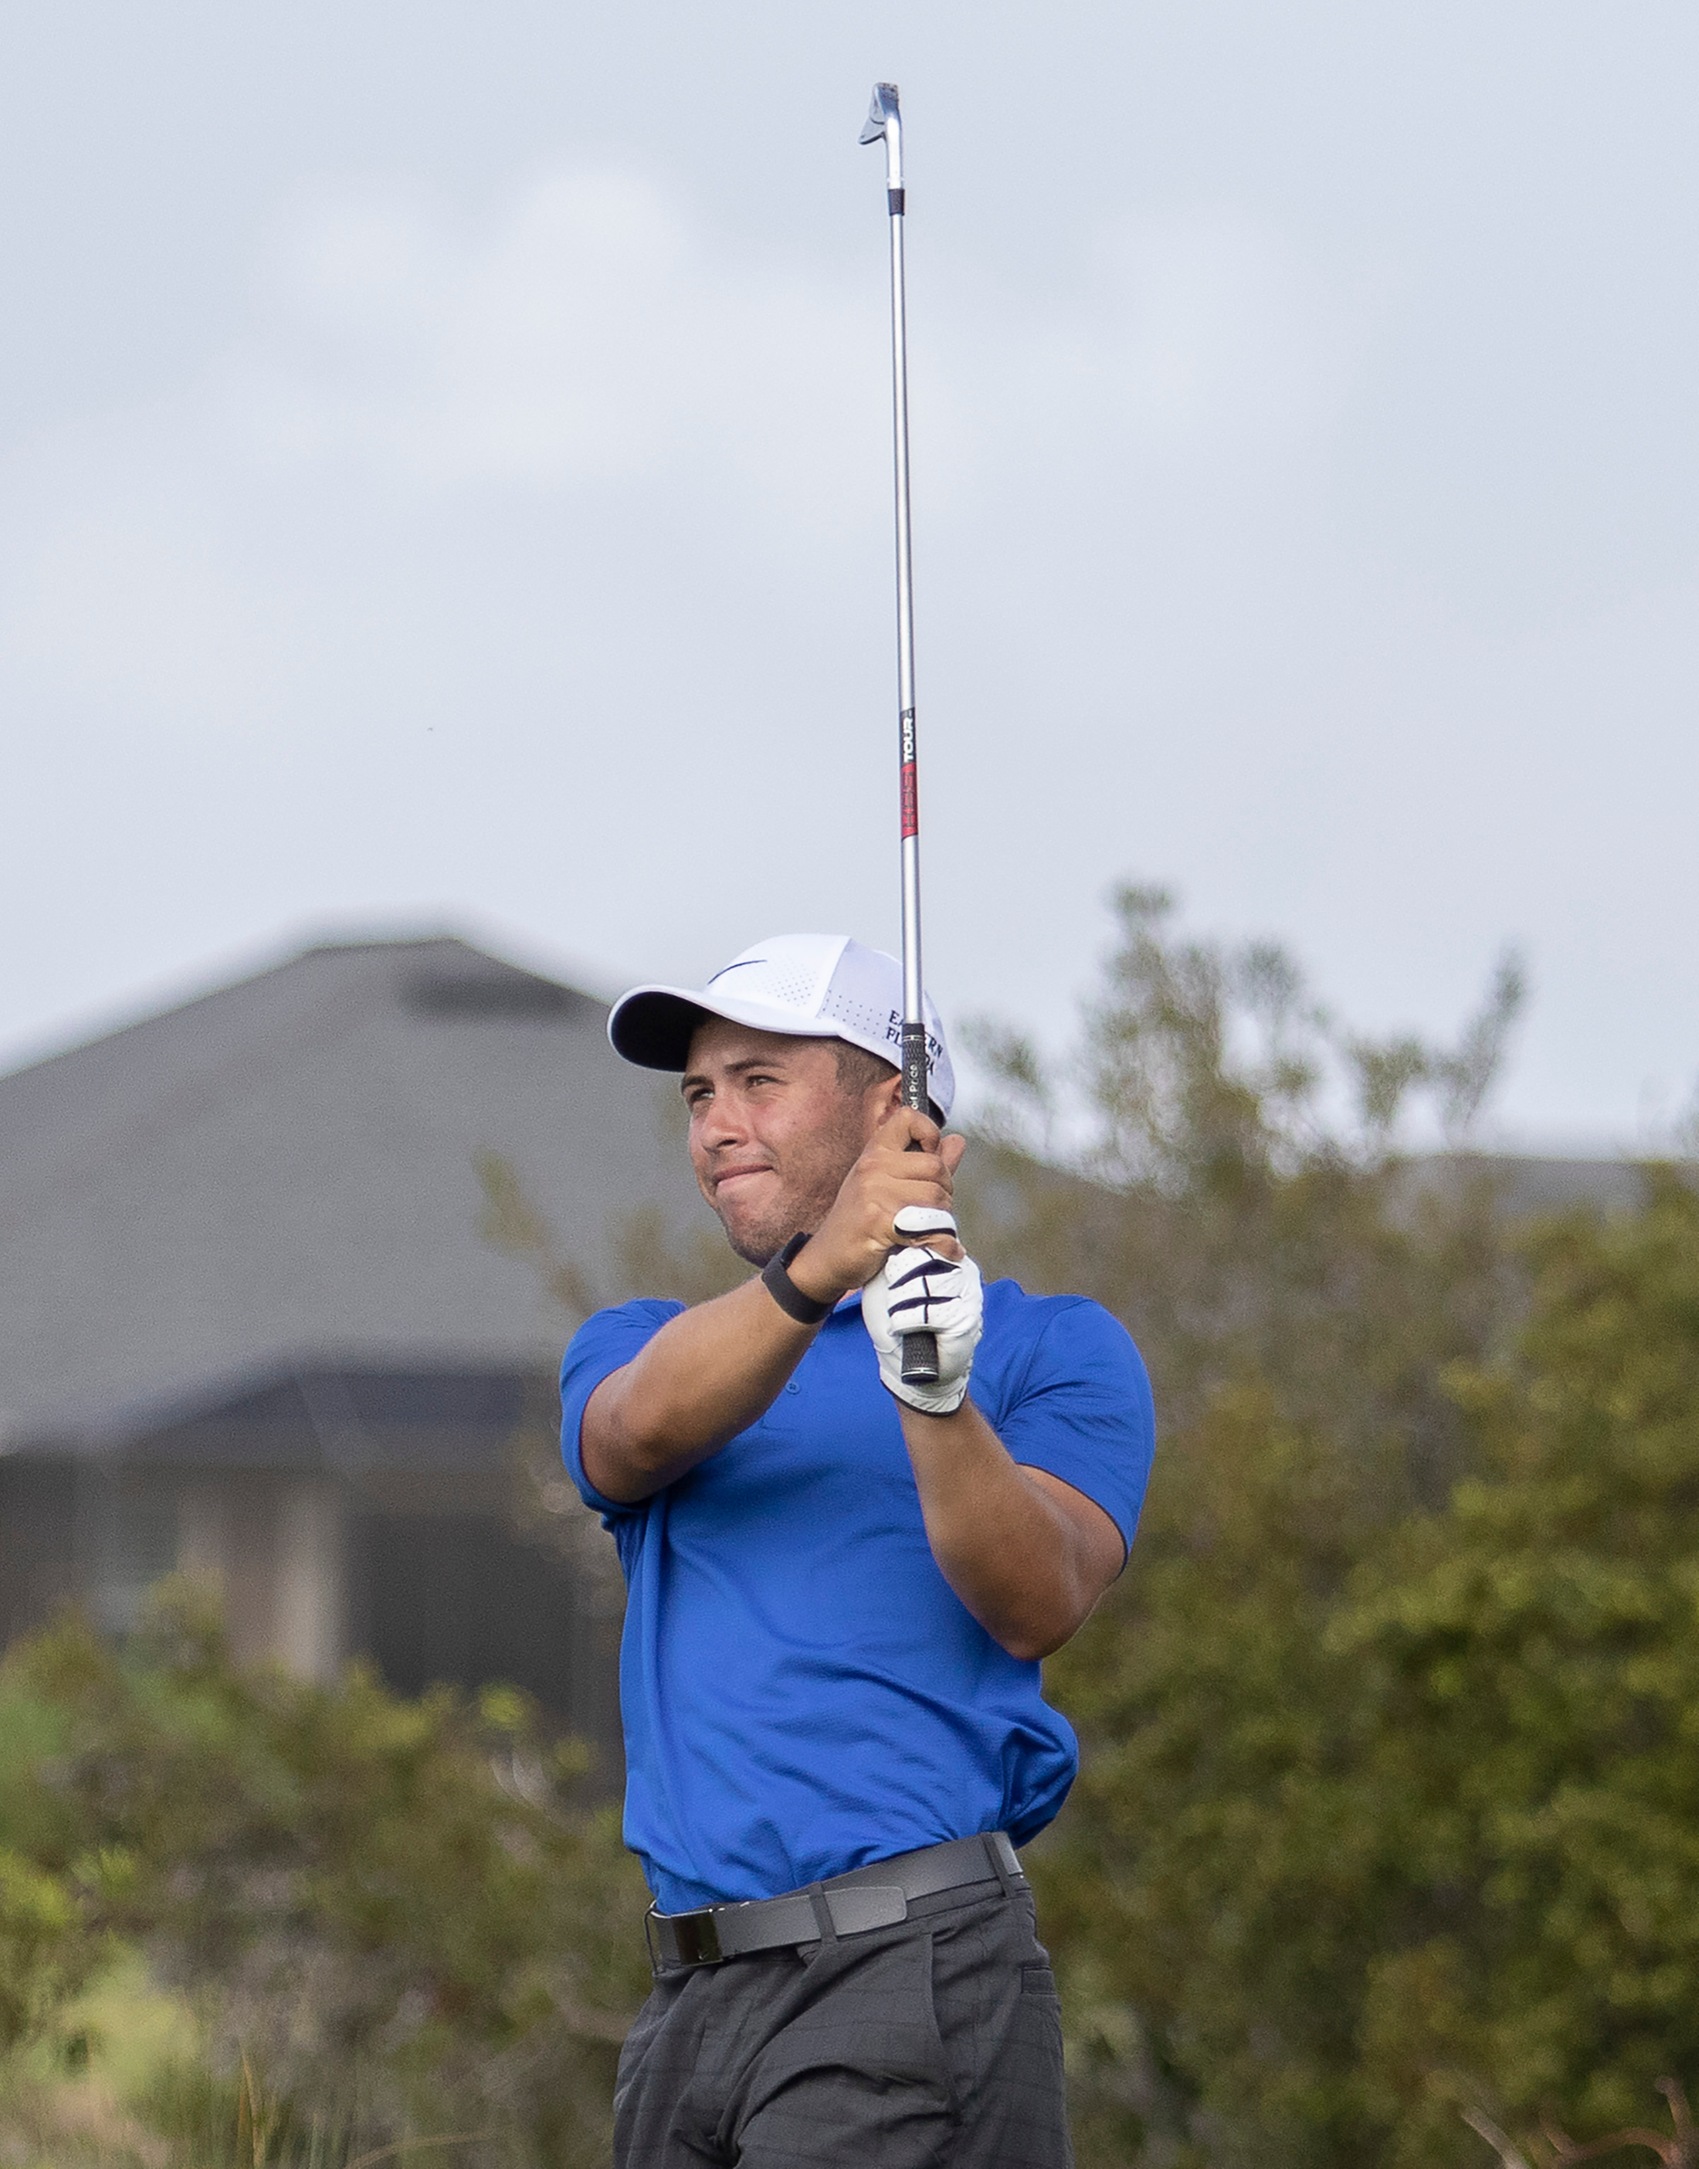 Men's golf team places fifth at Battle at the Shores event